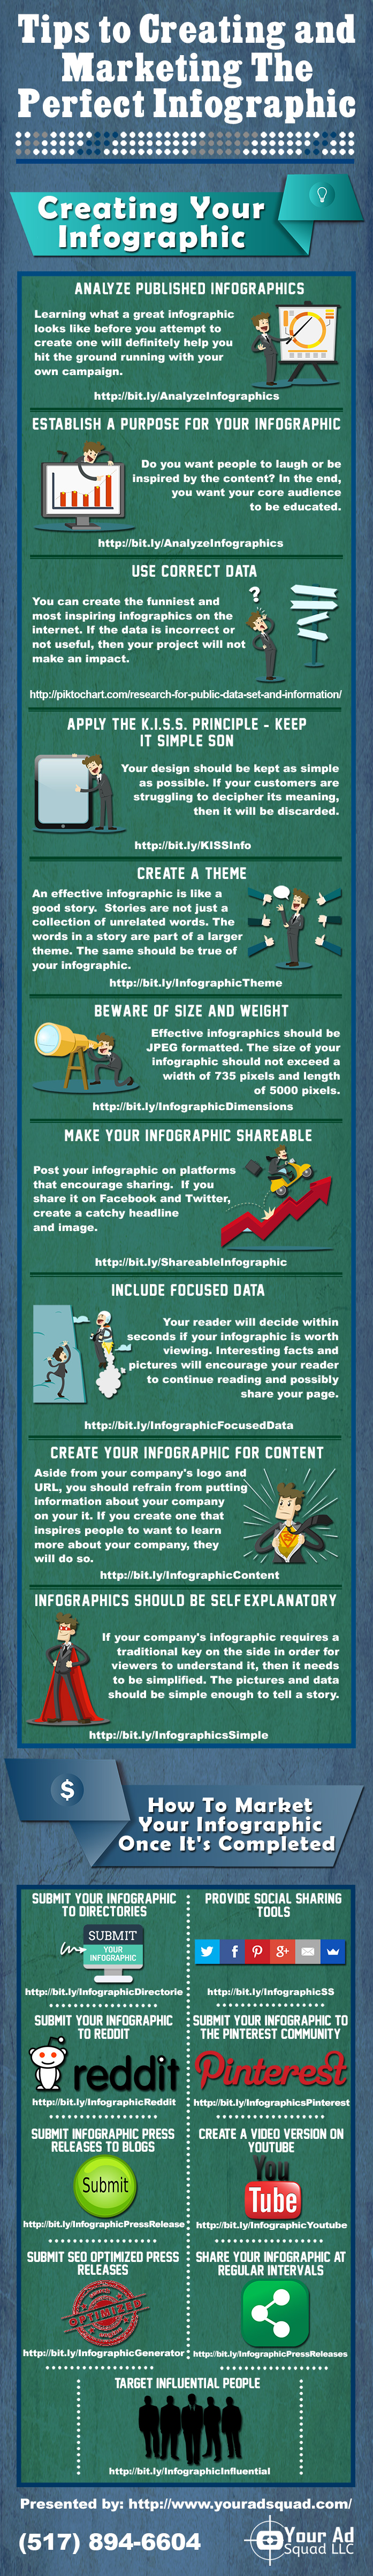 Tips to Creating and Marketing Great Infographics